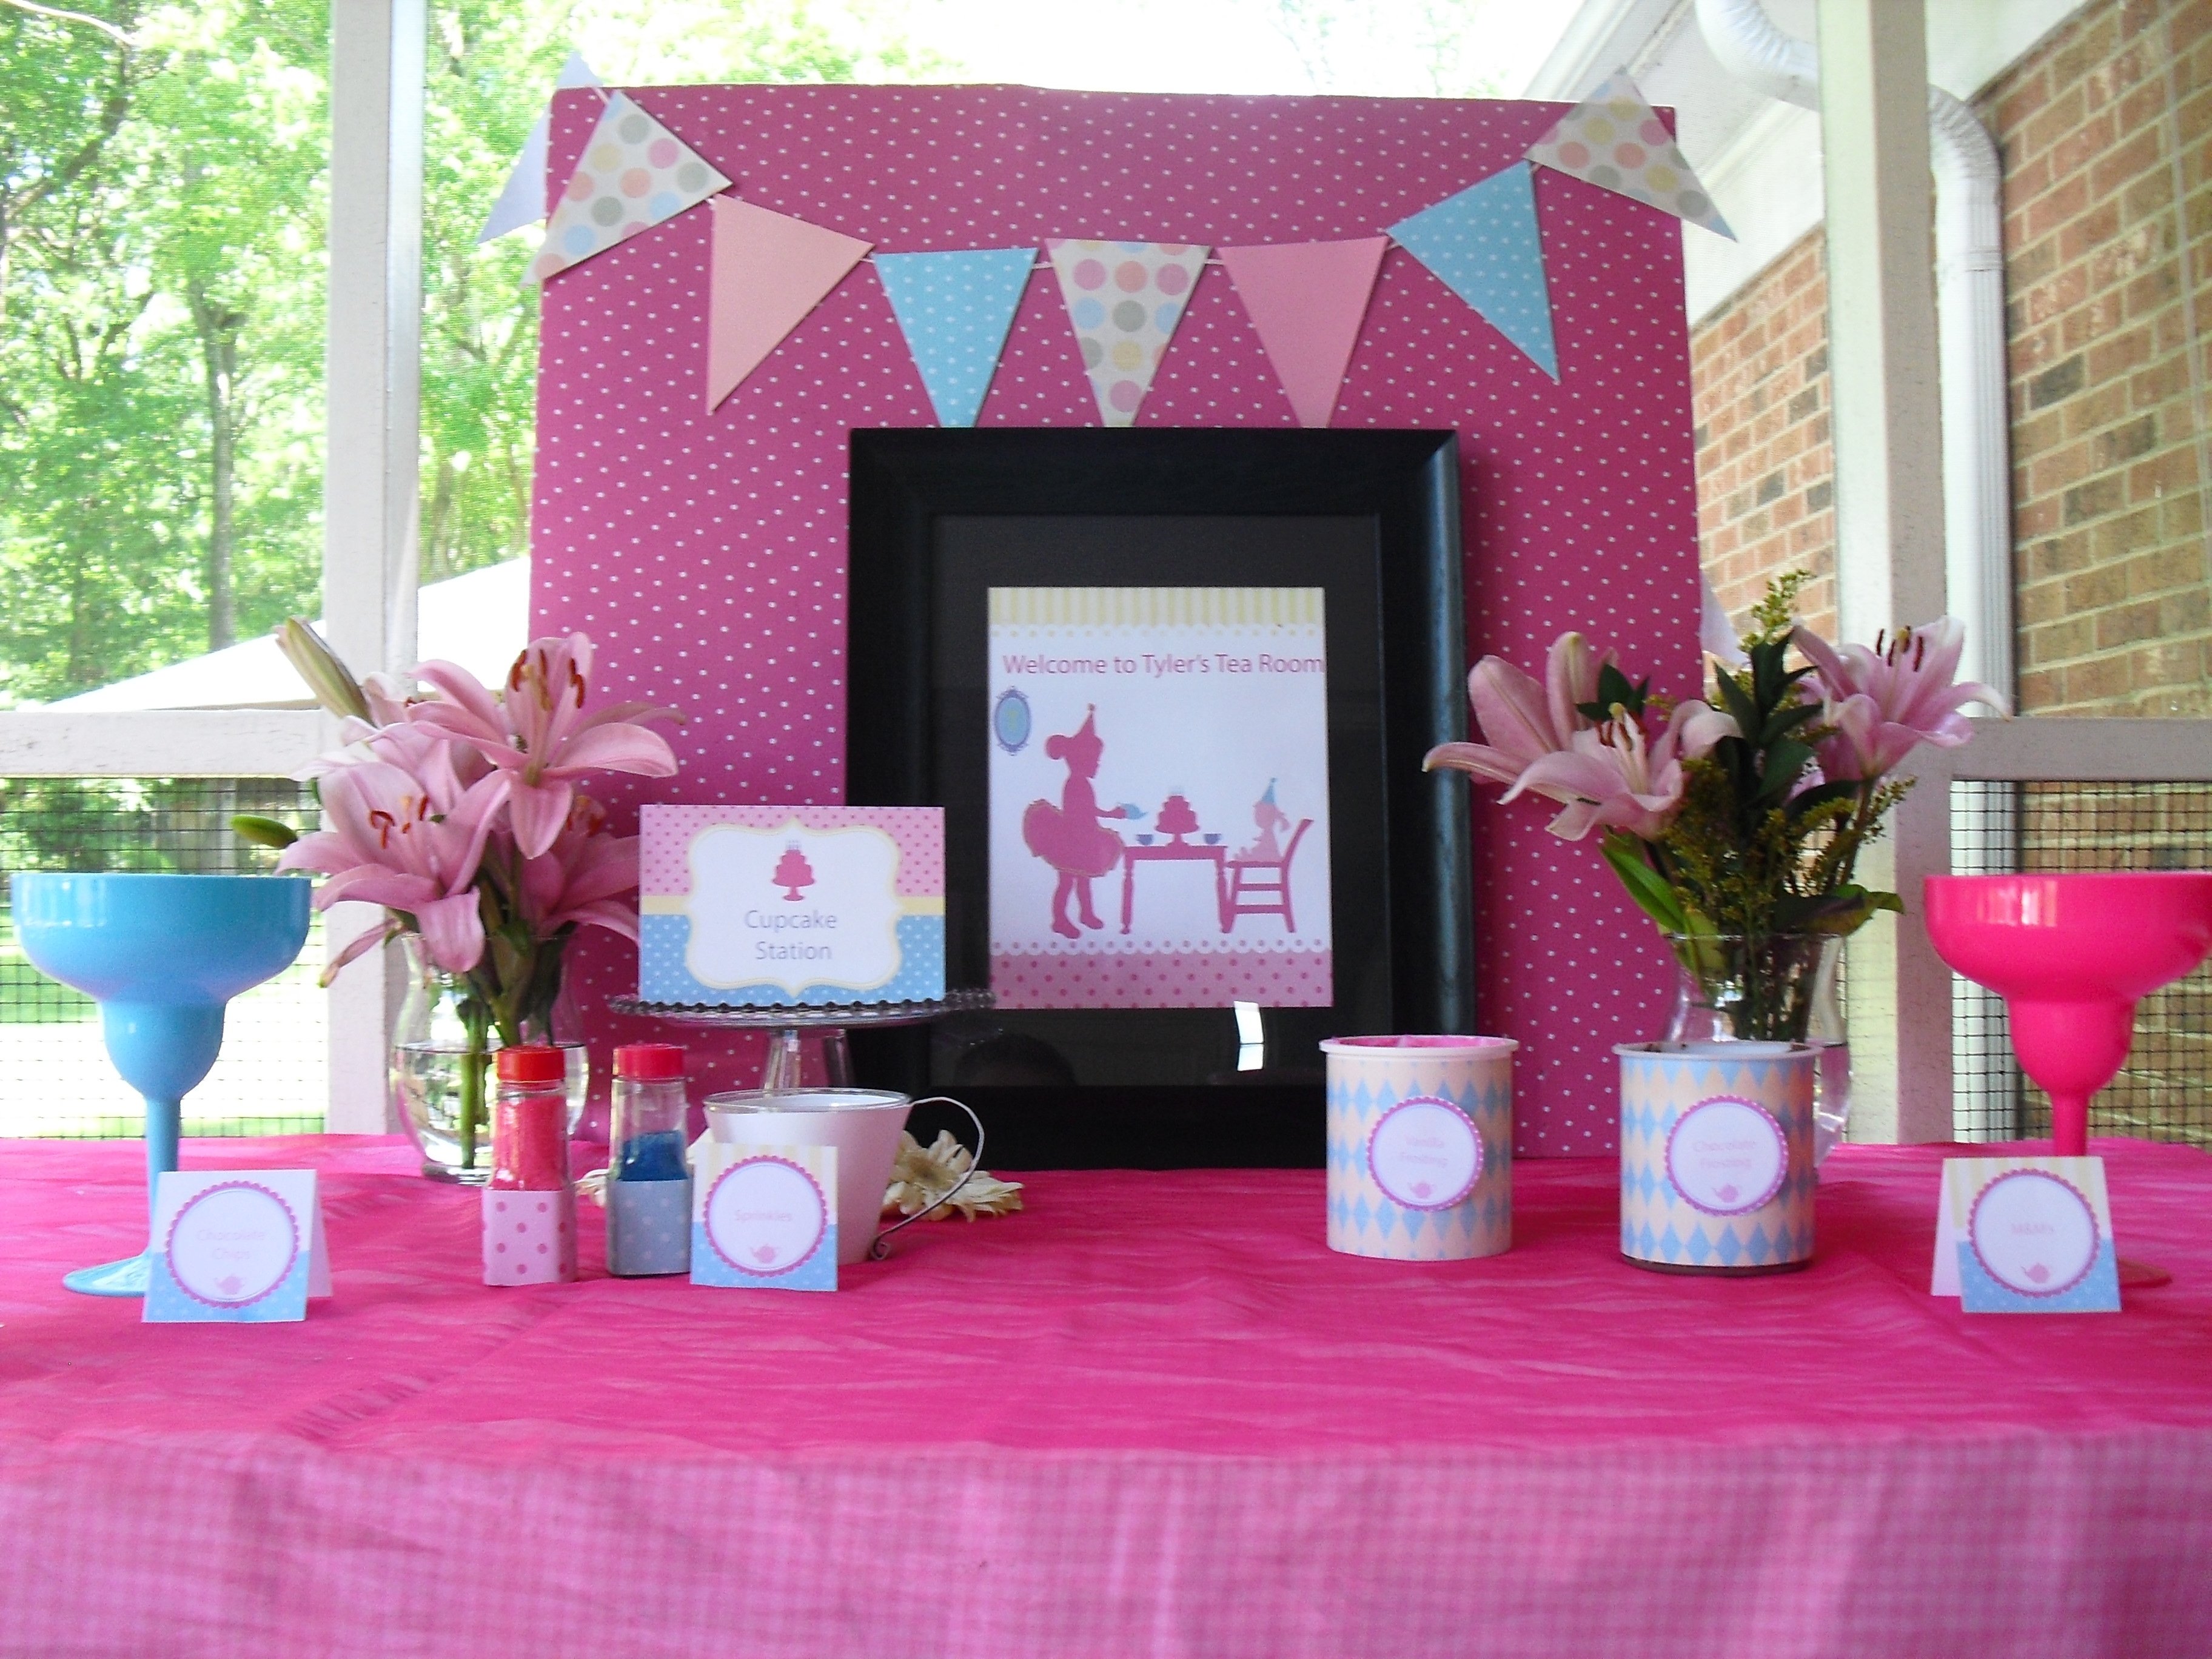 10 Gorgeous Birthday Ideas For 3 Year Old a tea party with baby dolls and tutus anders ruff custom designs llc 2 2022